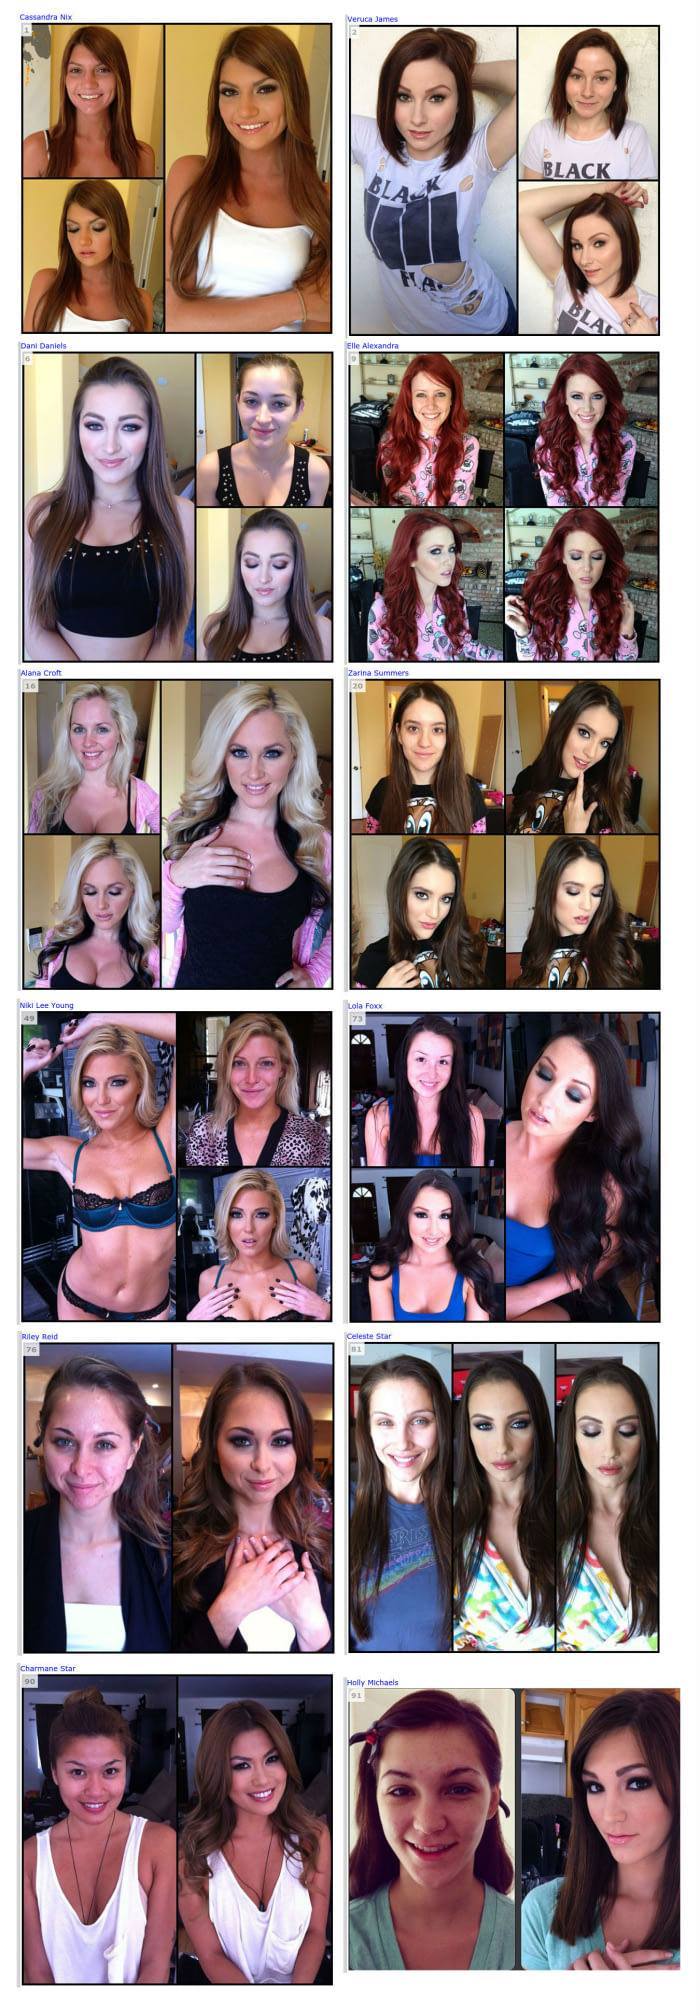 Porn actress before and after make-up - Porn actress, Makeup, No make up, Longpost, Porn Actors and Porn Actresses